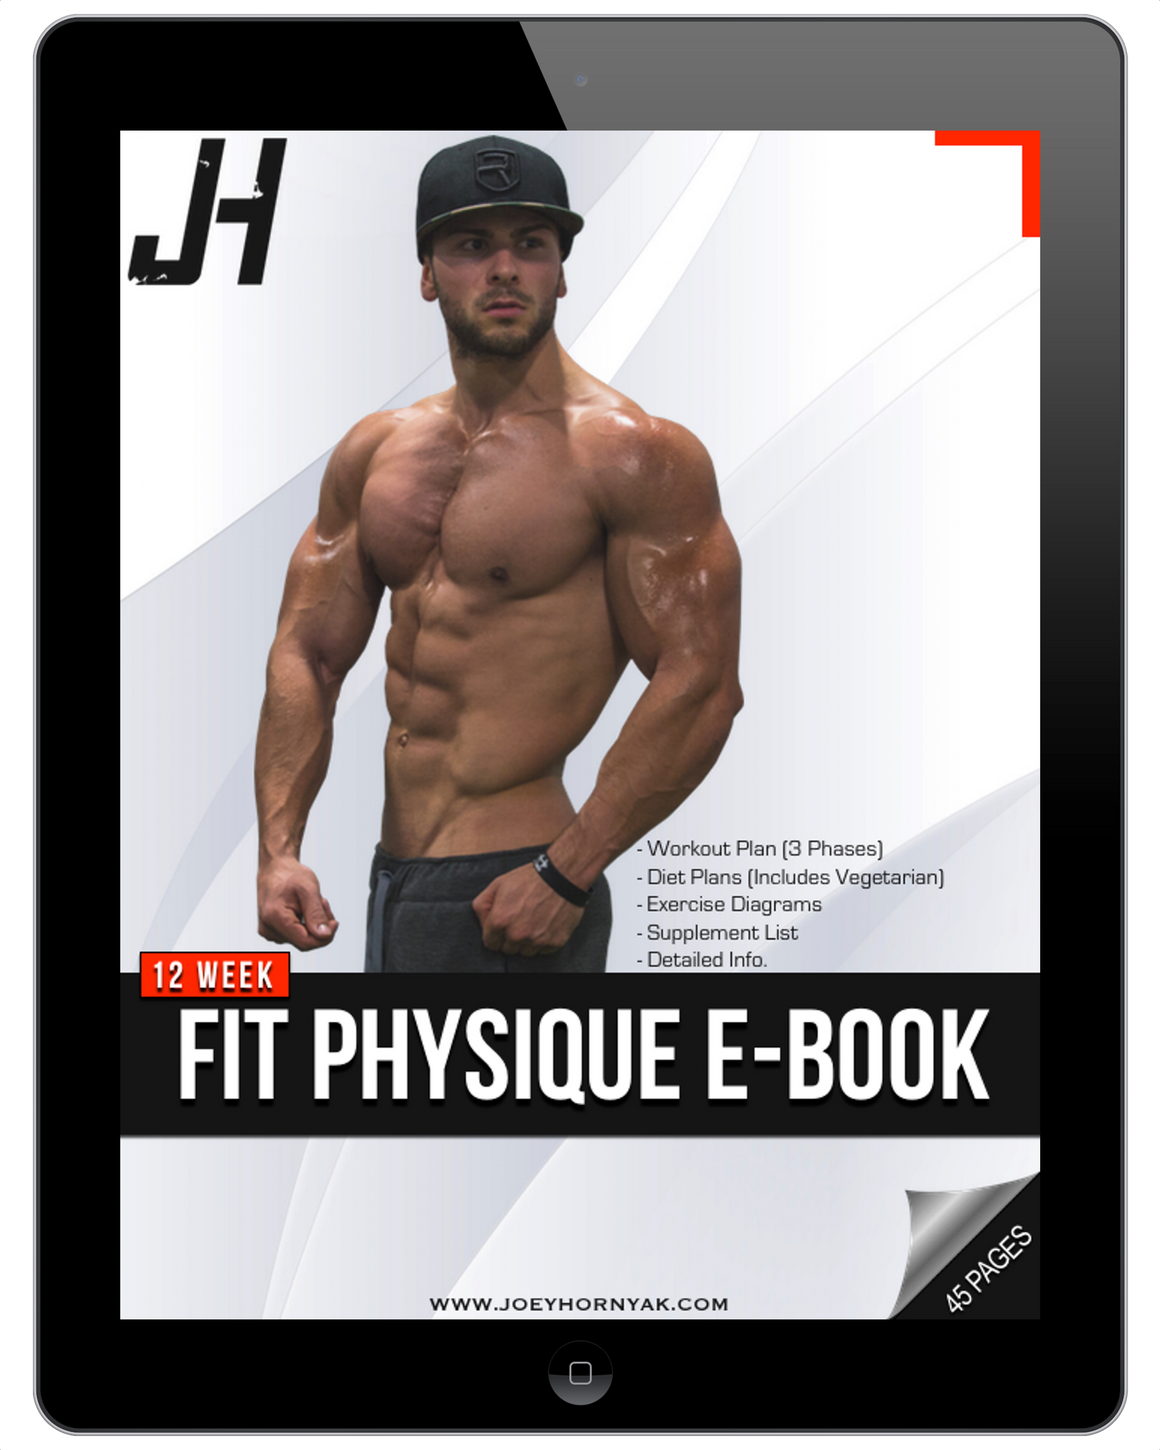 12 Week Fit Physique E-Book